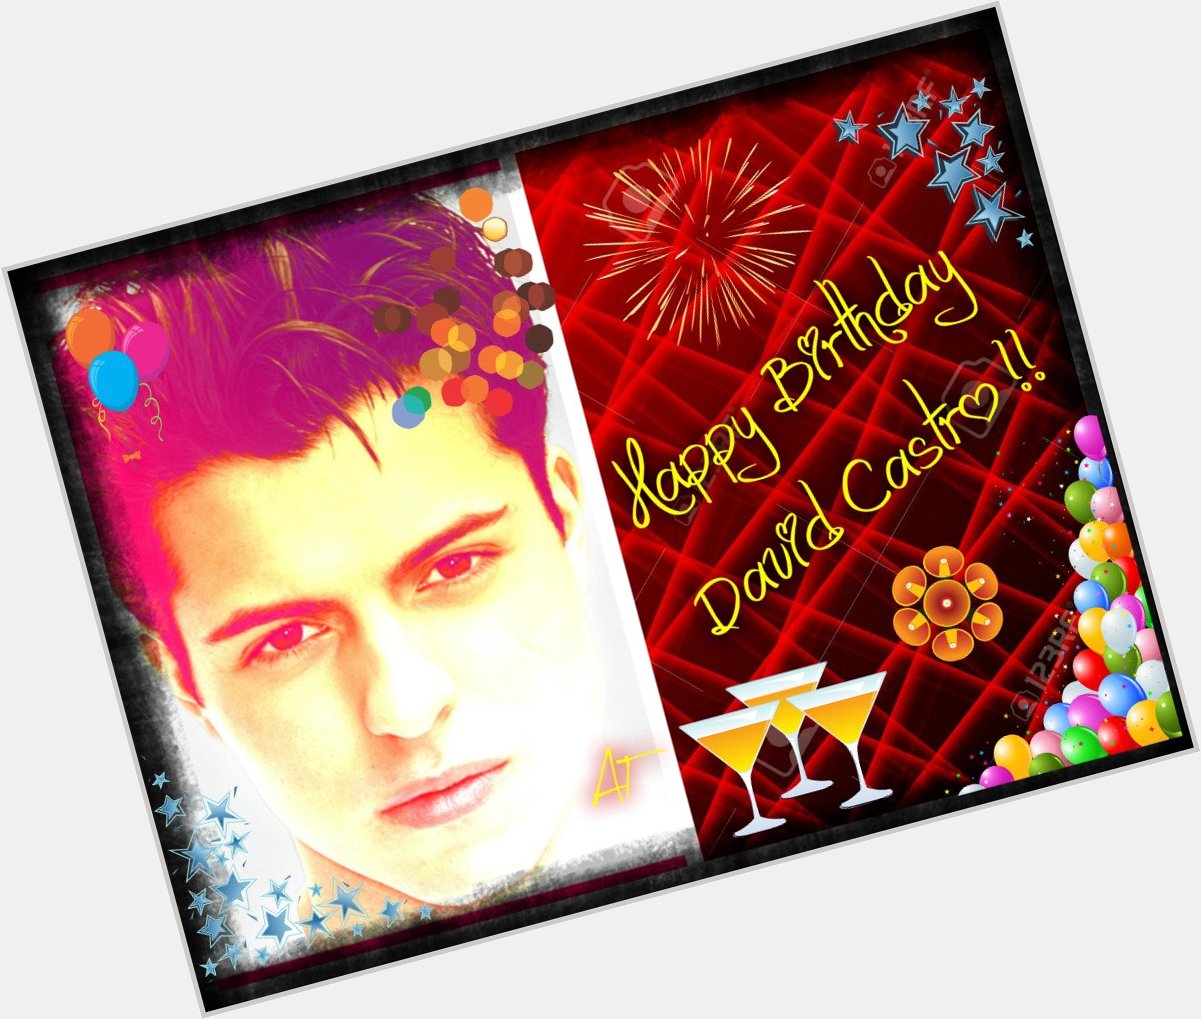  Happy Birthday David Castro!!
May all your wishes be fulfilled!!   